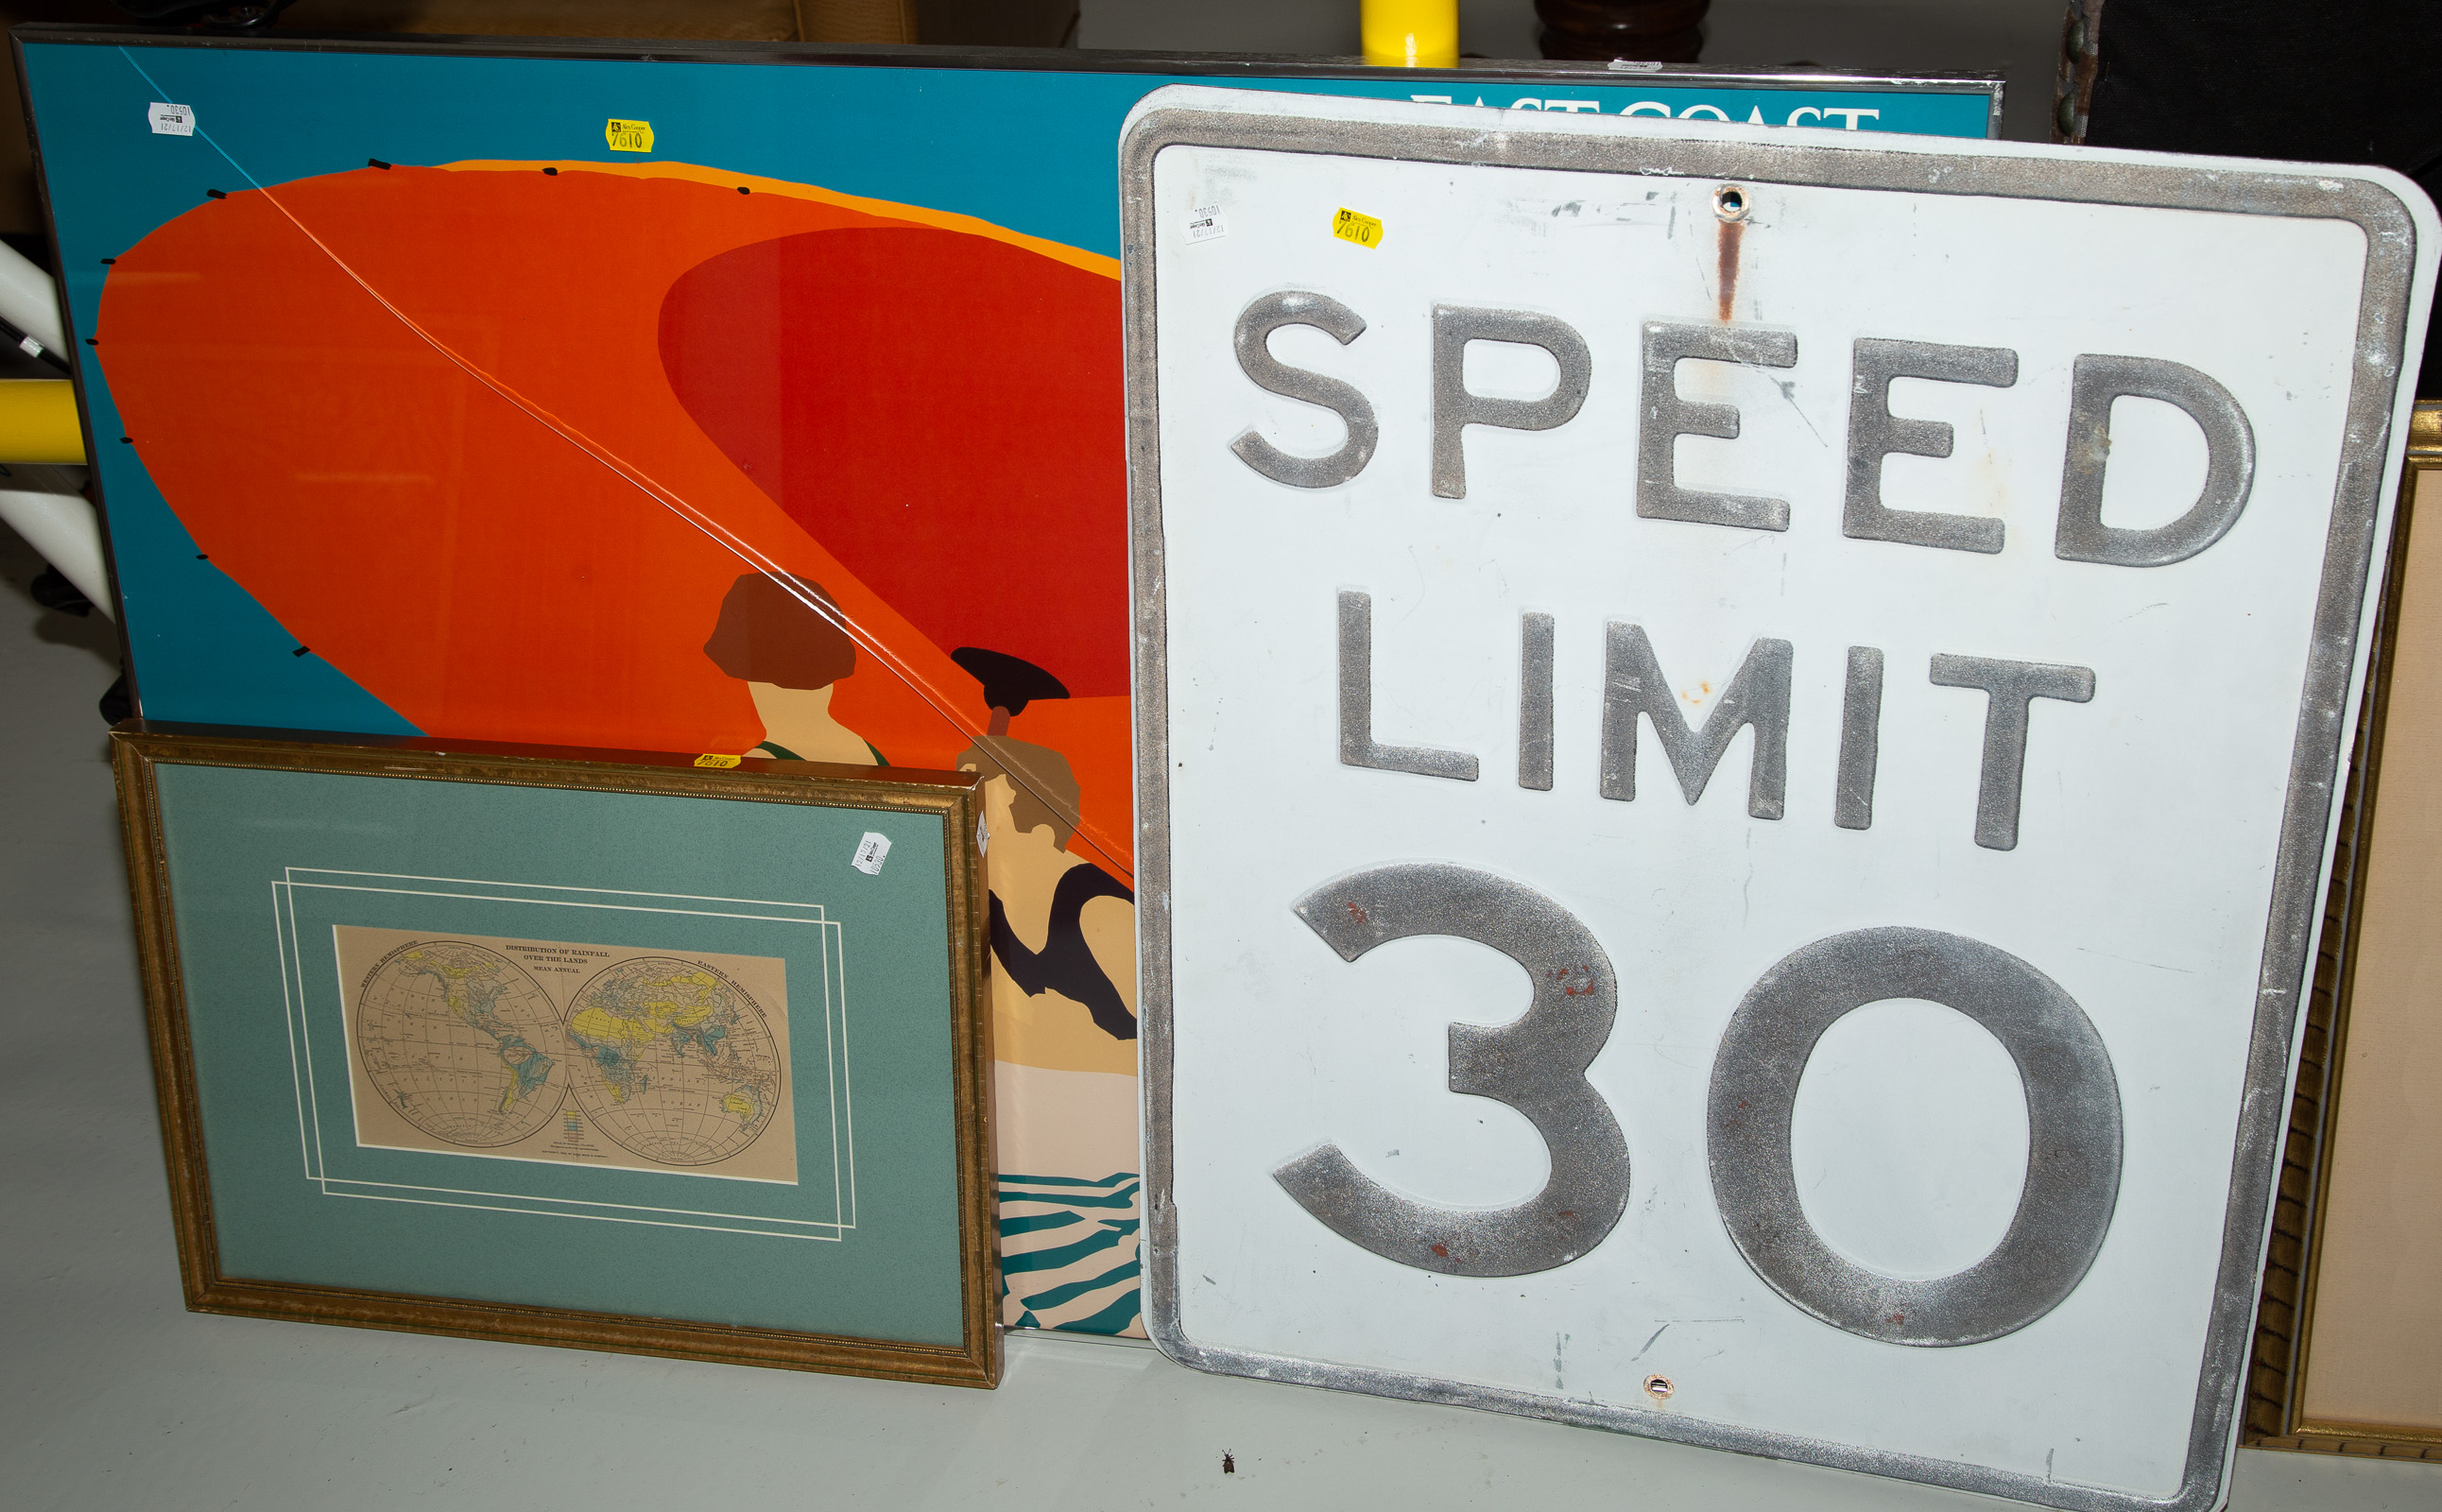 TWO FRAMED ART WORKS & SPEED LIMIT